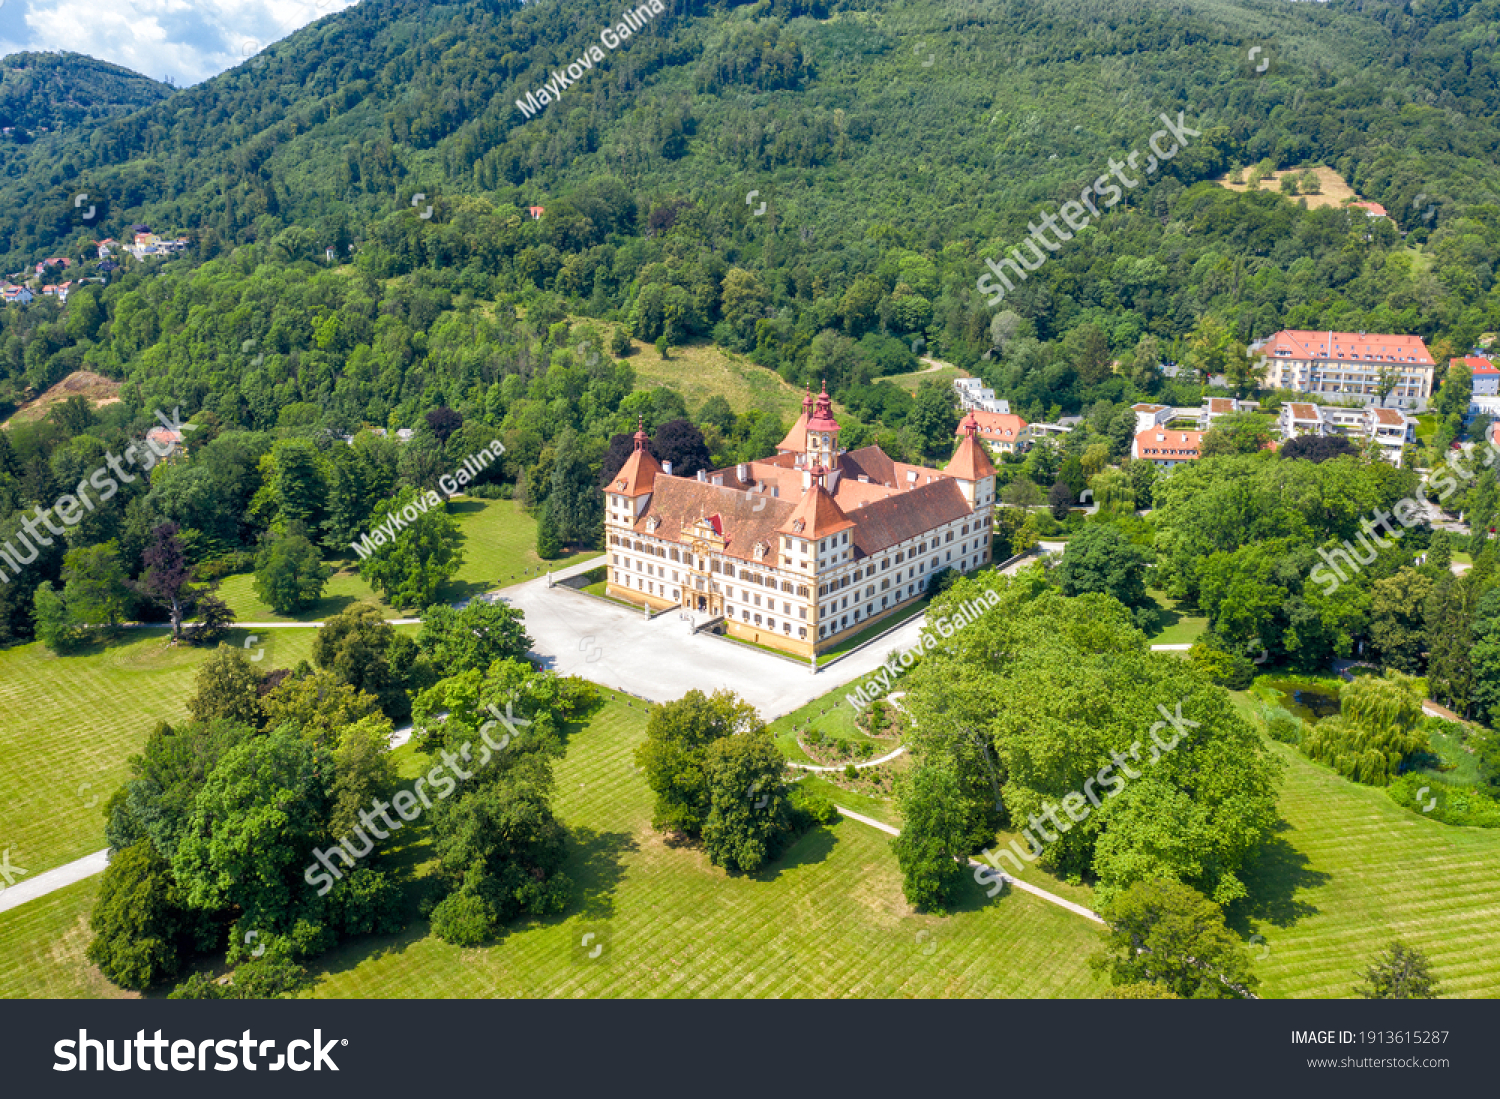 Graz, Austria. Eggenberg Palace (Schloss Eggenberg) - the largest aristocratic residence in Styria is listed as a World Heritage Site. Construction was completed by 1646, Aerial View #1913615287